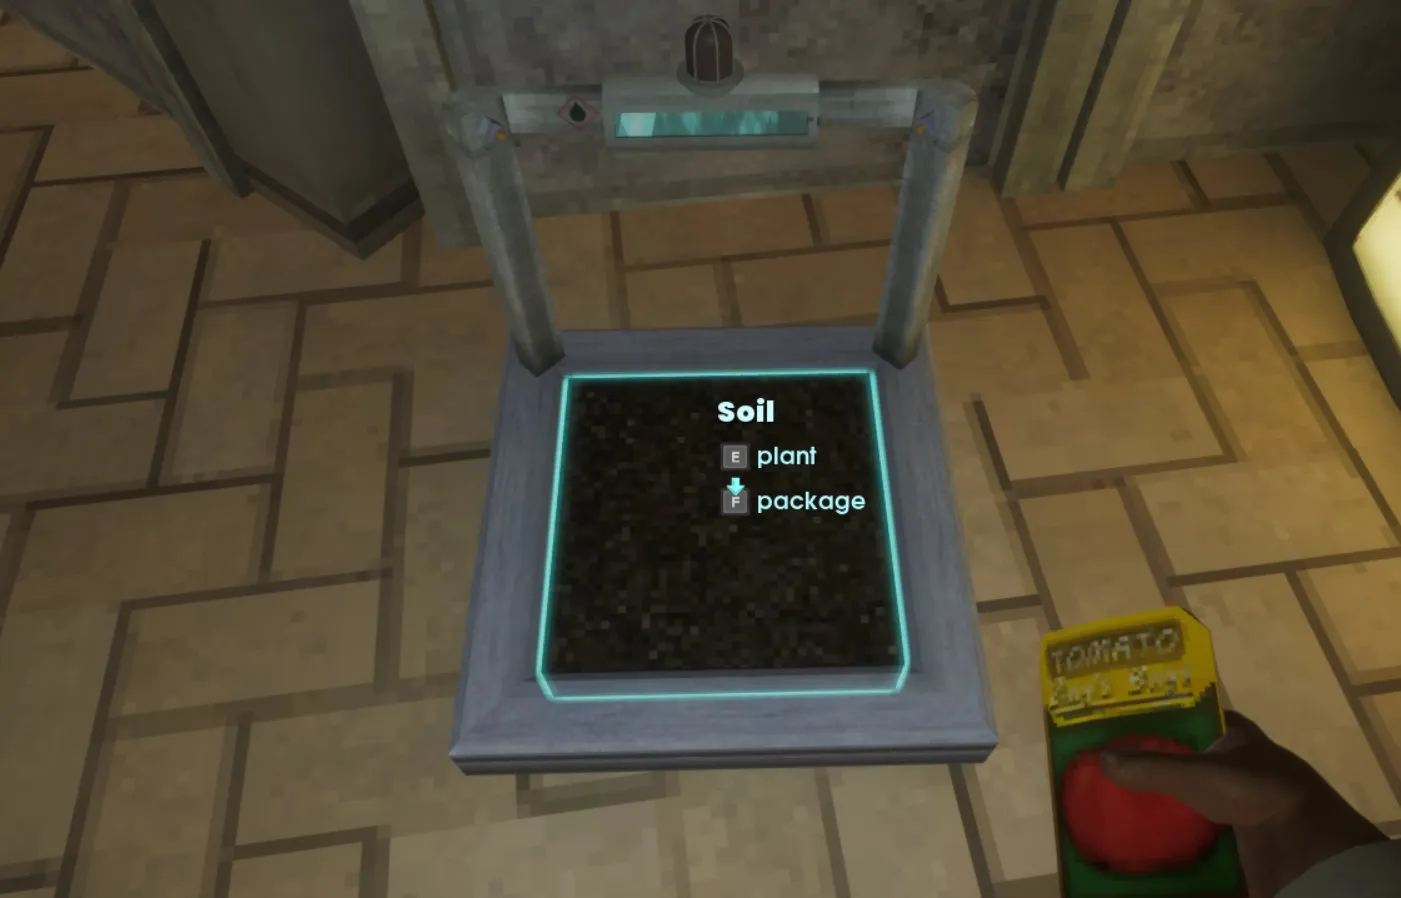 First person POV, scientist holds a bag of tomato seeds and is prompted to plant them by onscreen command. 